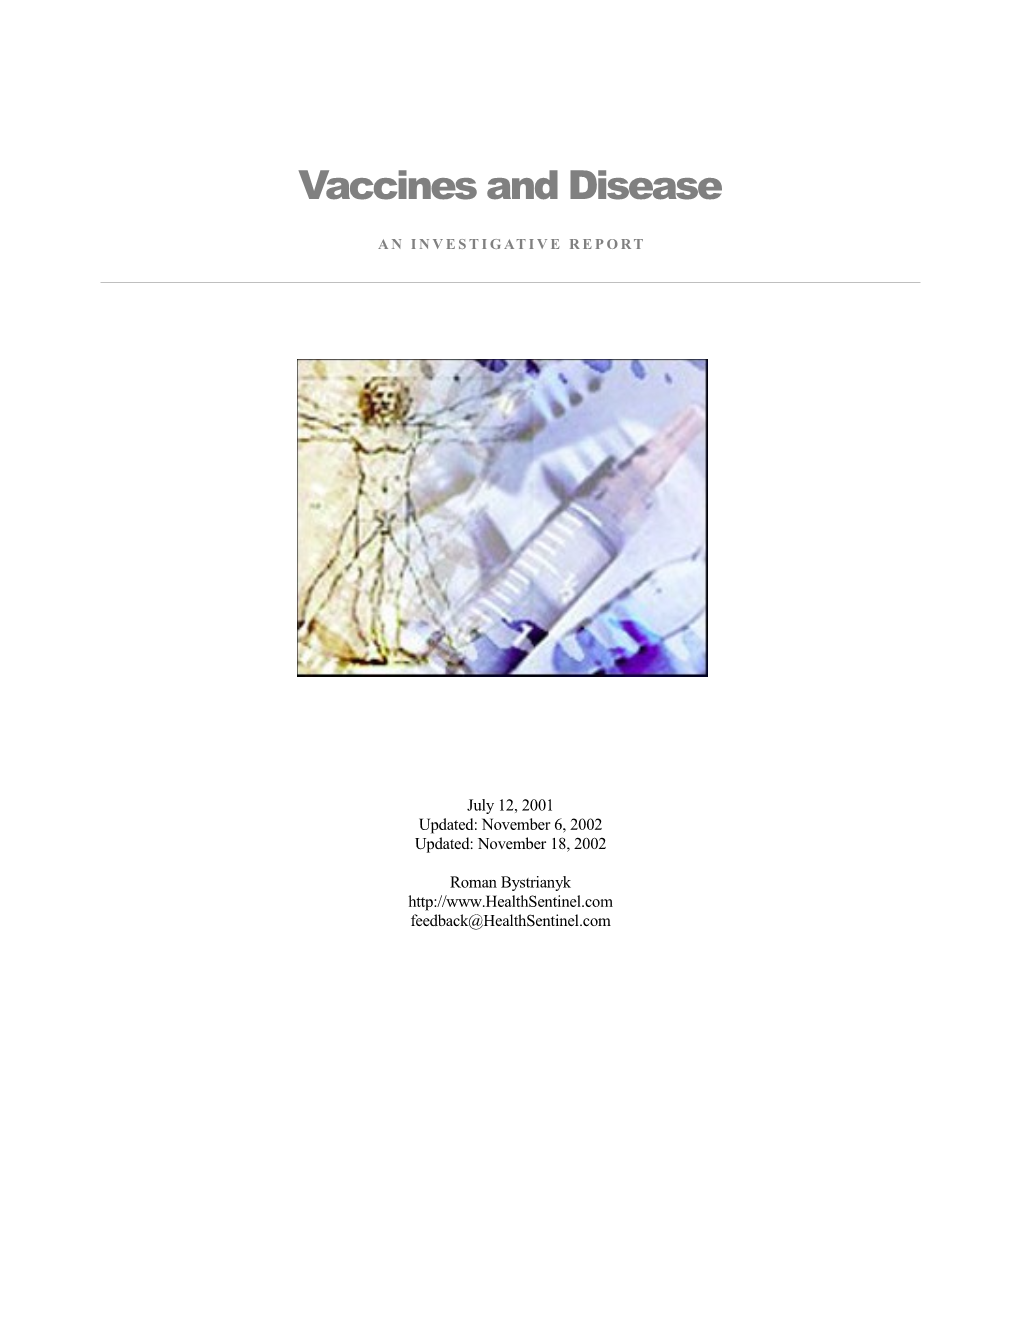 Vaccines and Disease an Investigative Report